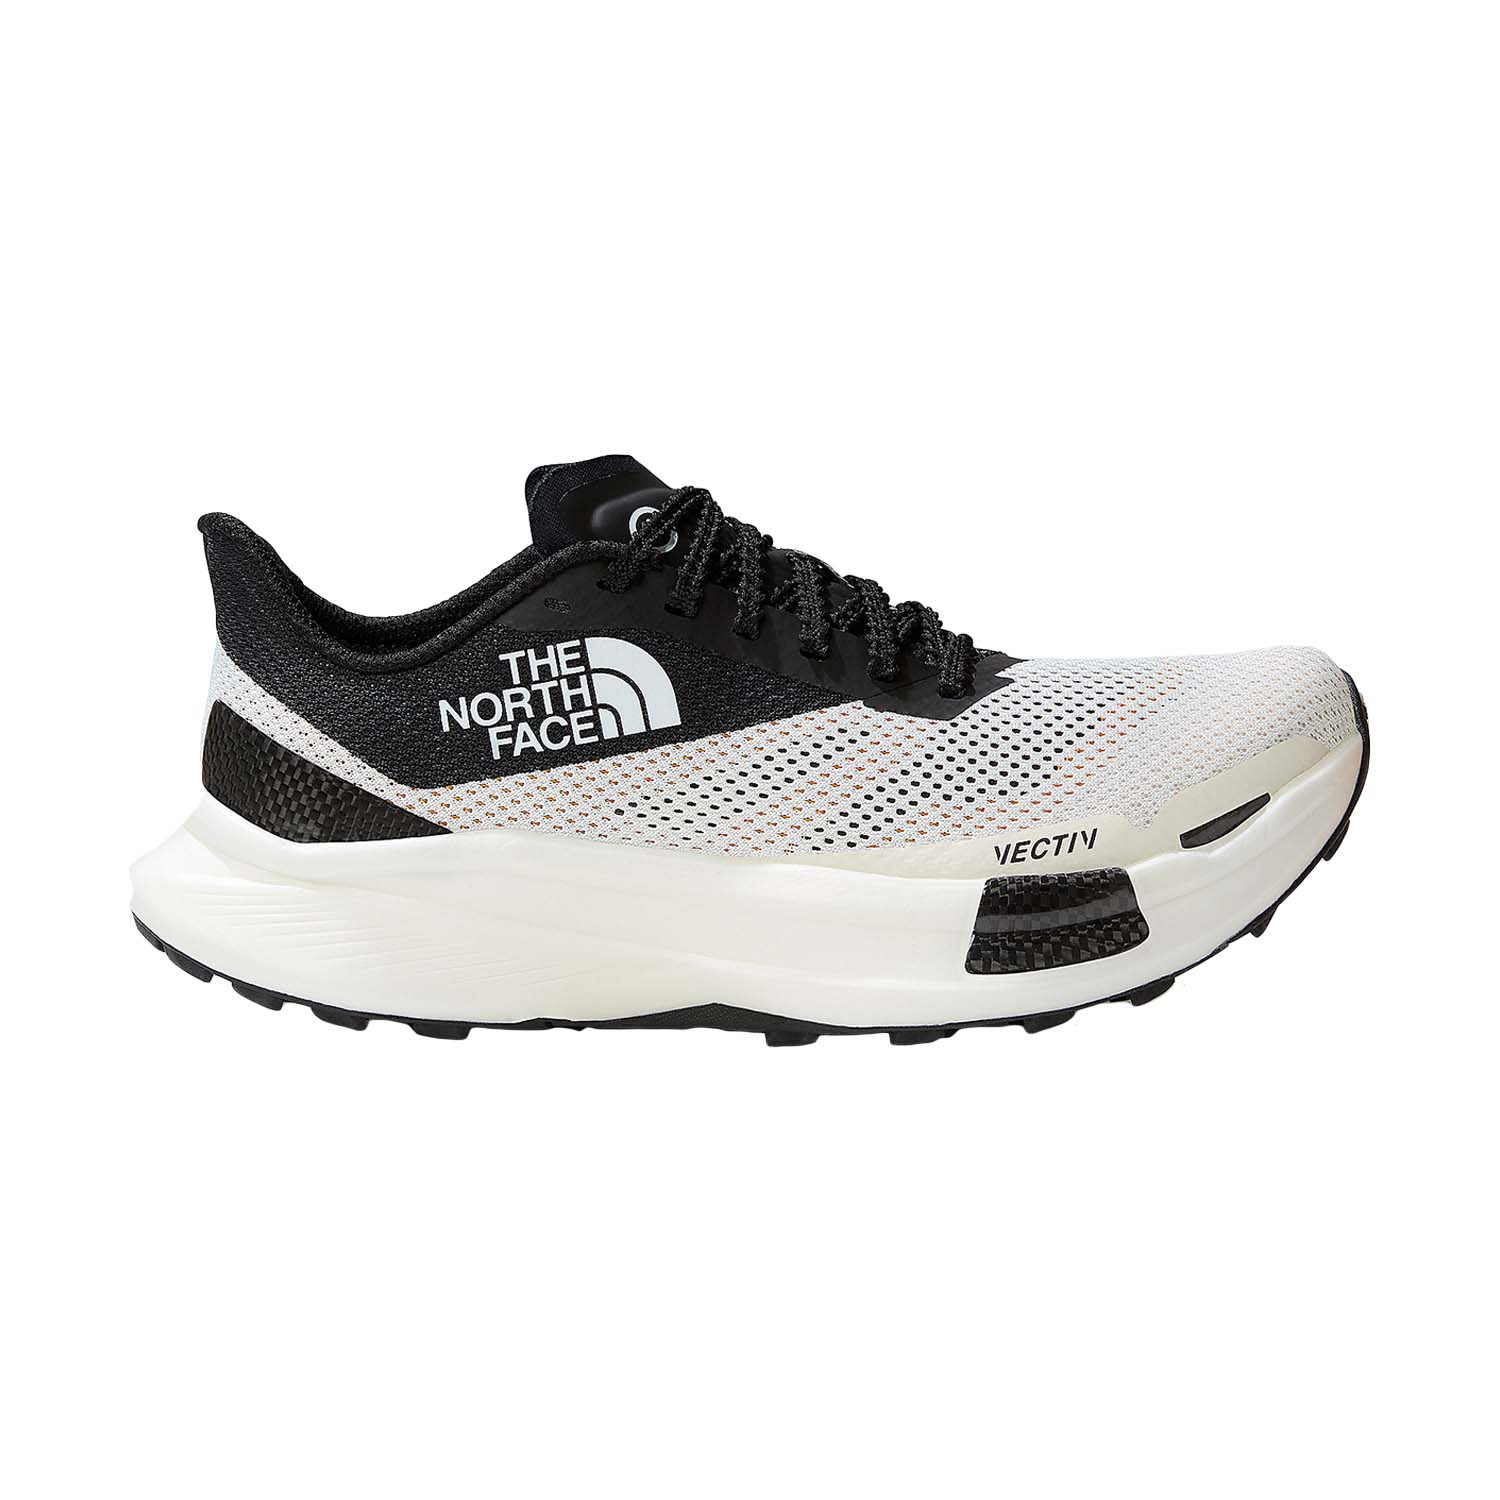 THE NORTH FACE VECTIV PRO 2 - MisterRunning